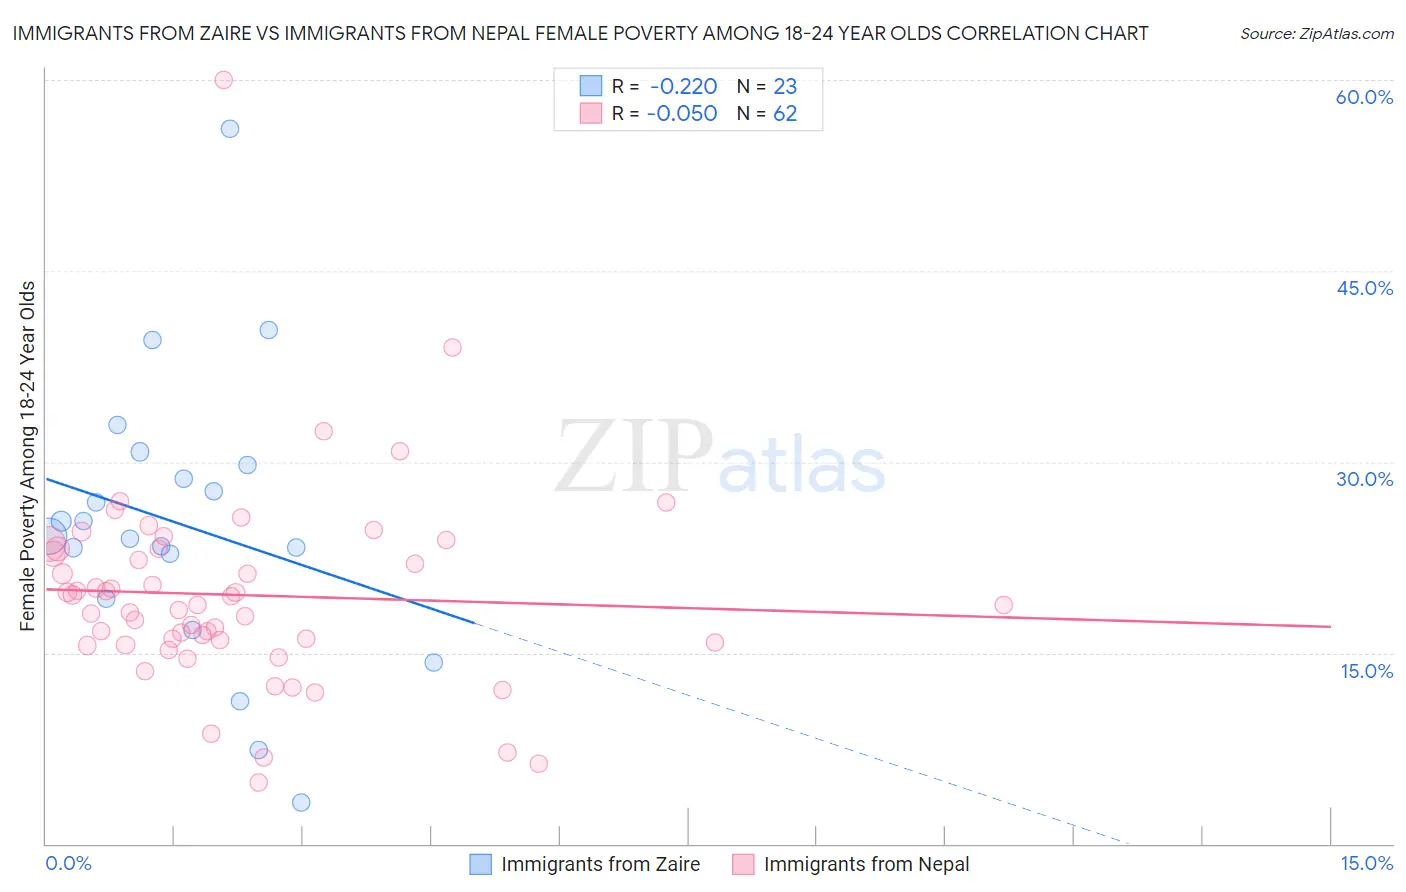 Immigrants from Zaire vs Immigrants from Nepal Female Poverty Among 18-24 Year Olds